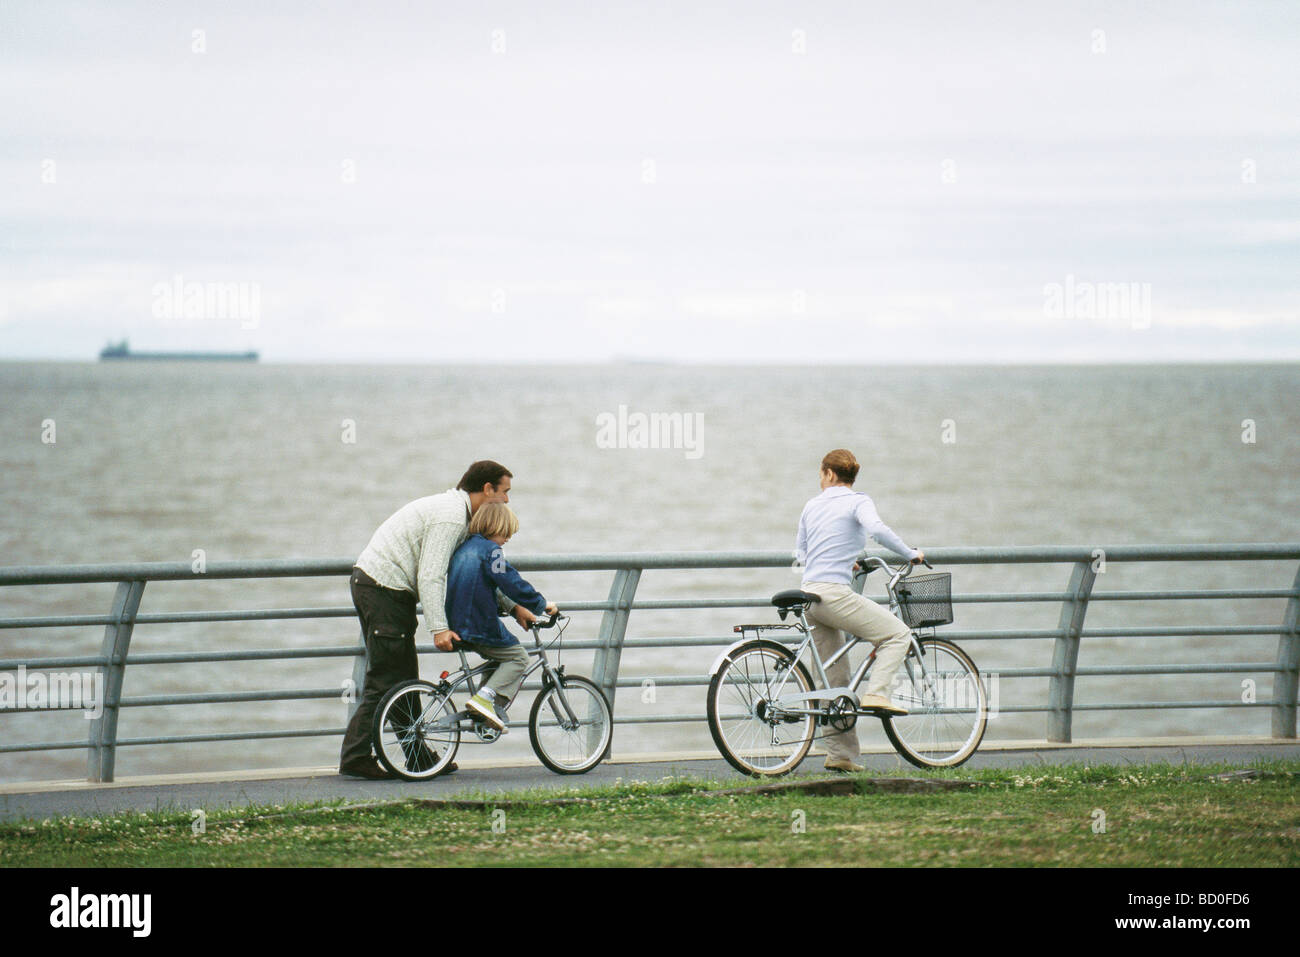 Father helping son learn to ride bicycle, mother watching Stock Photo